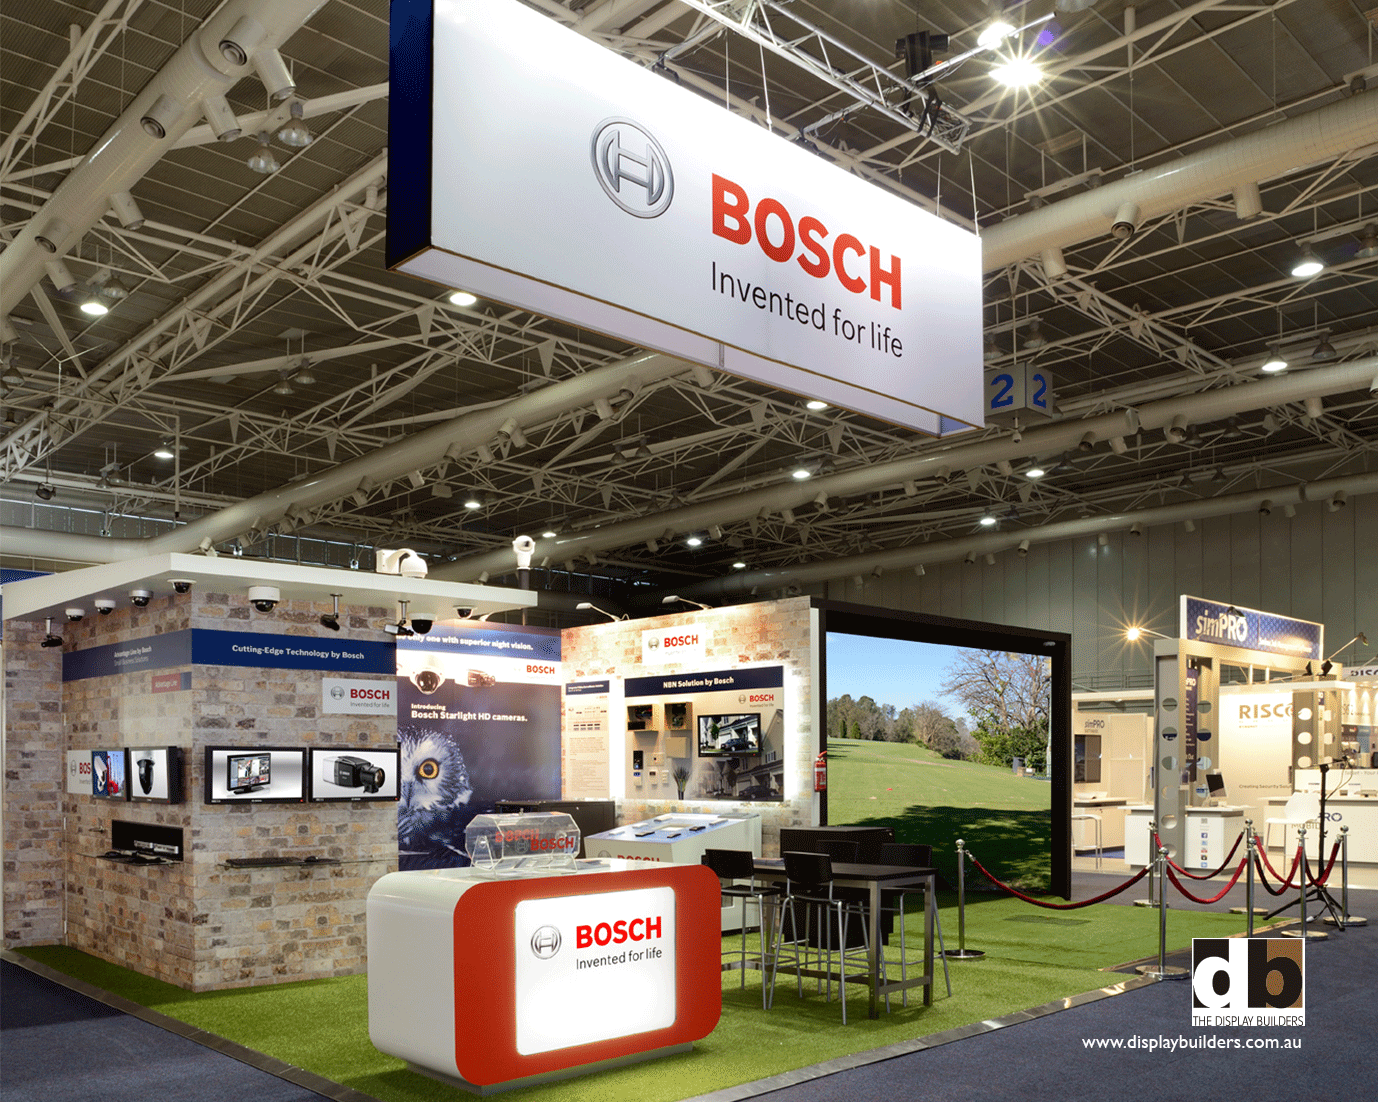 the bosch stand security 2013featured an interactive golf game to